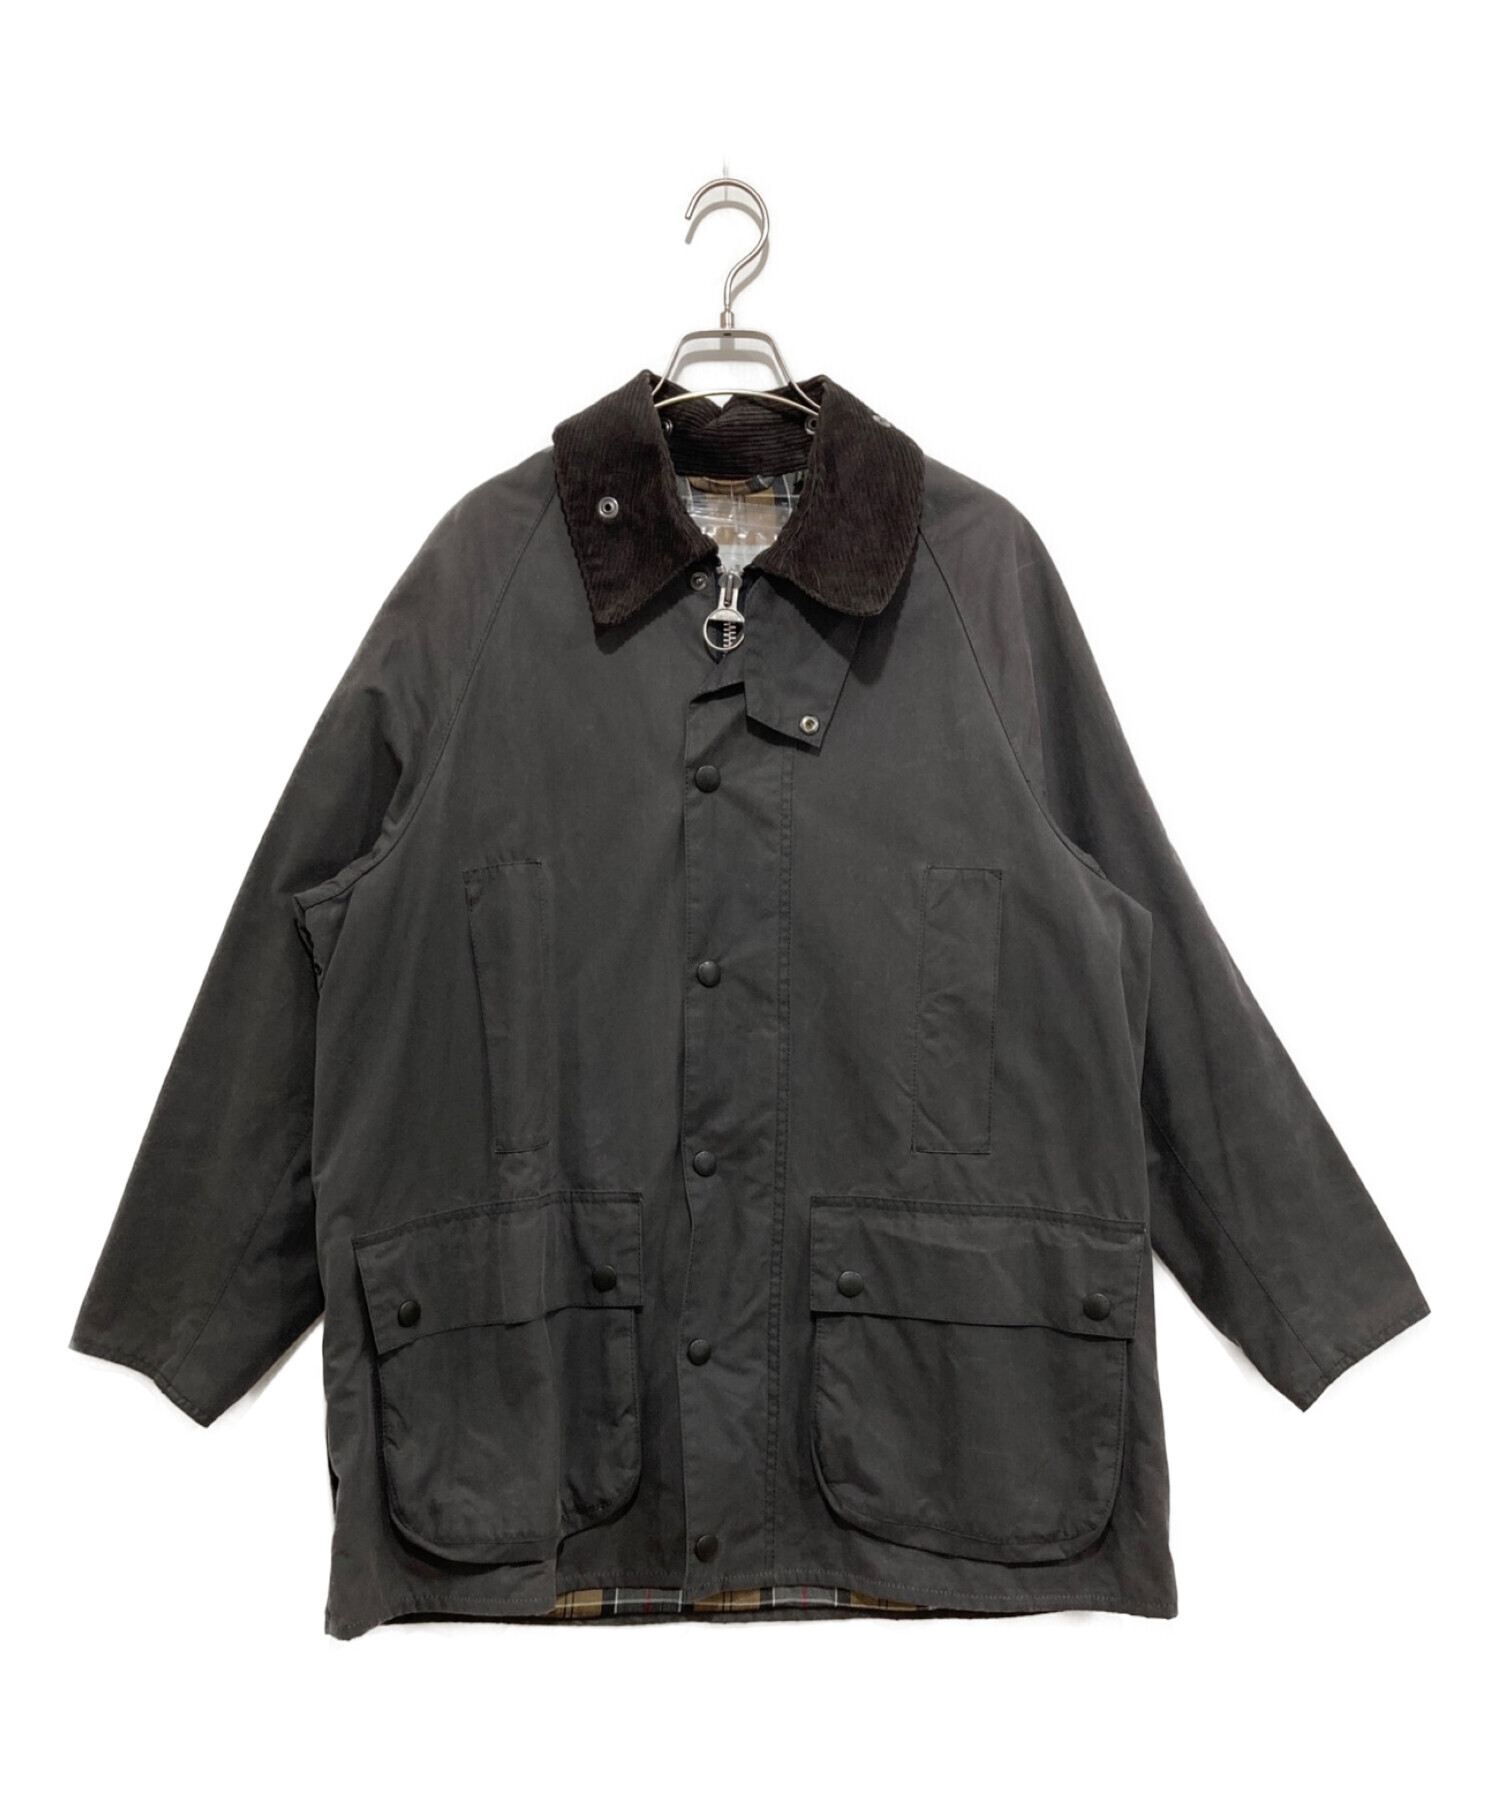 Barbour OS WAX BEDALE 36サイズ28000円でどうでしょうか